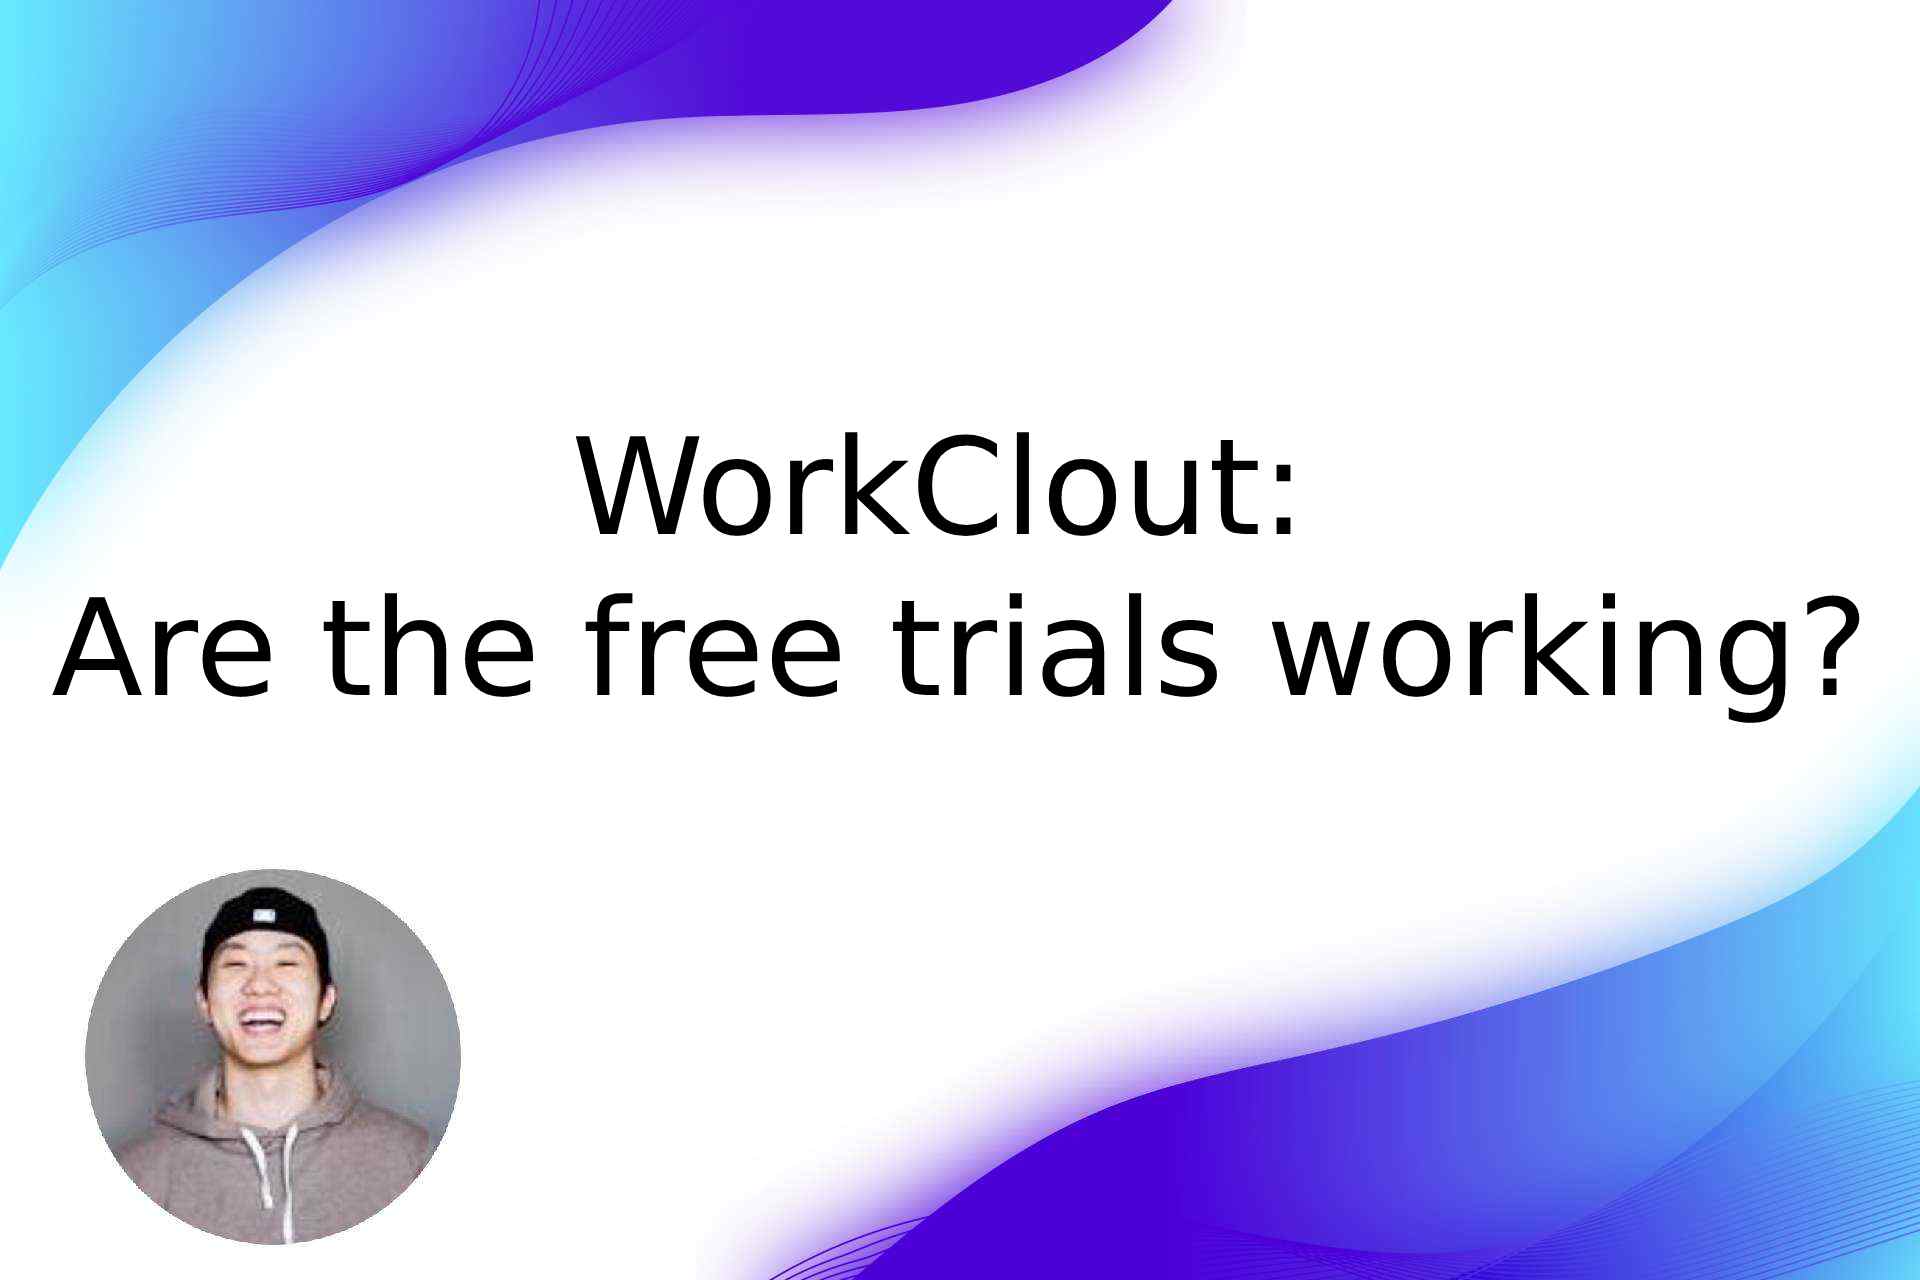 WorkClout: Are the free trials working?